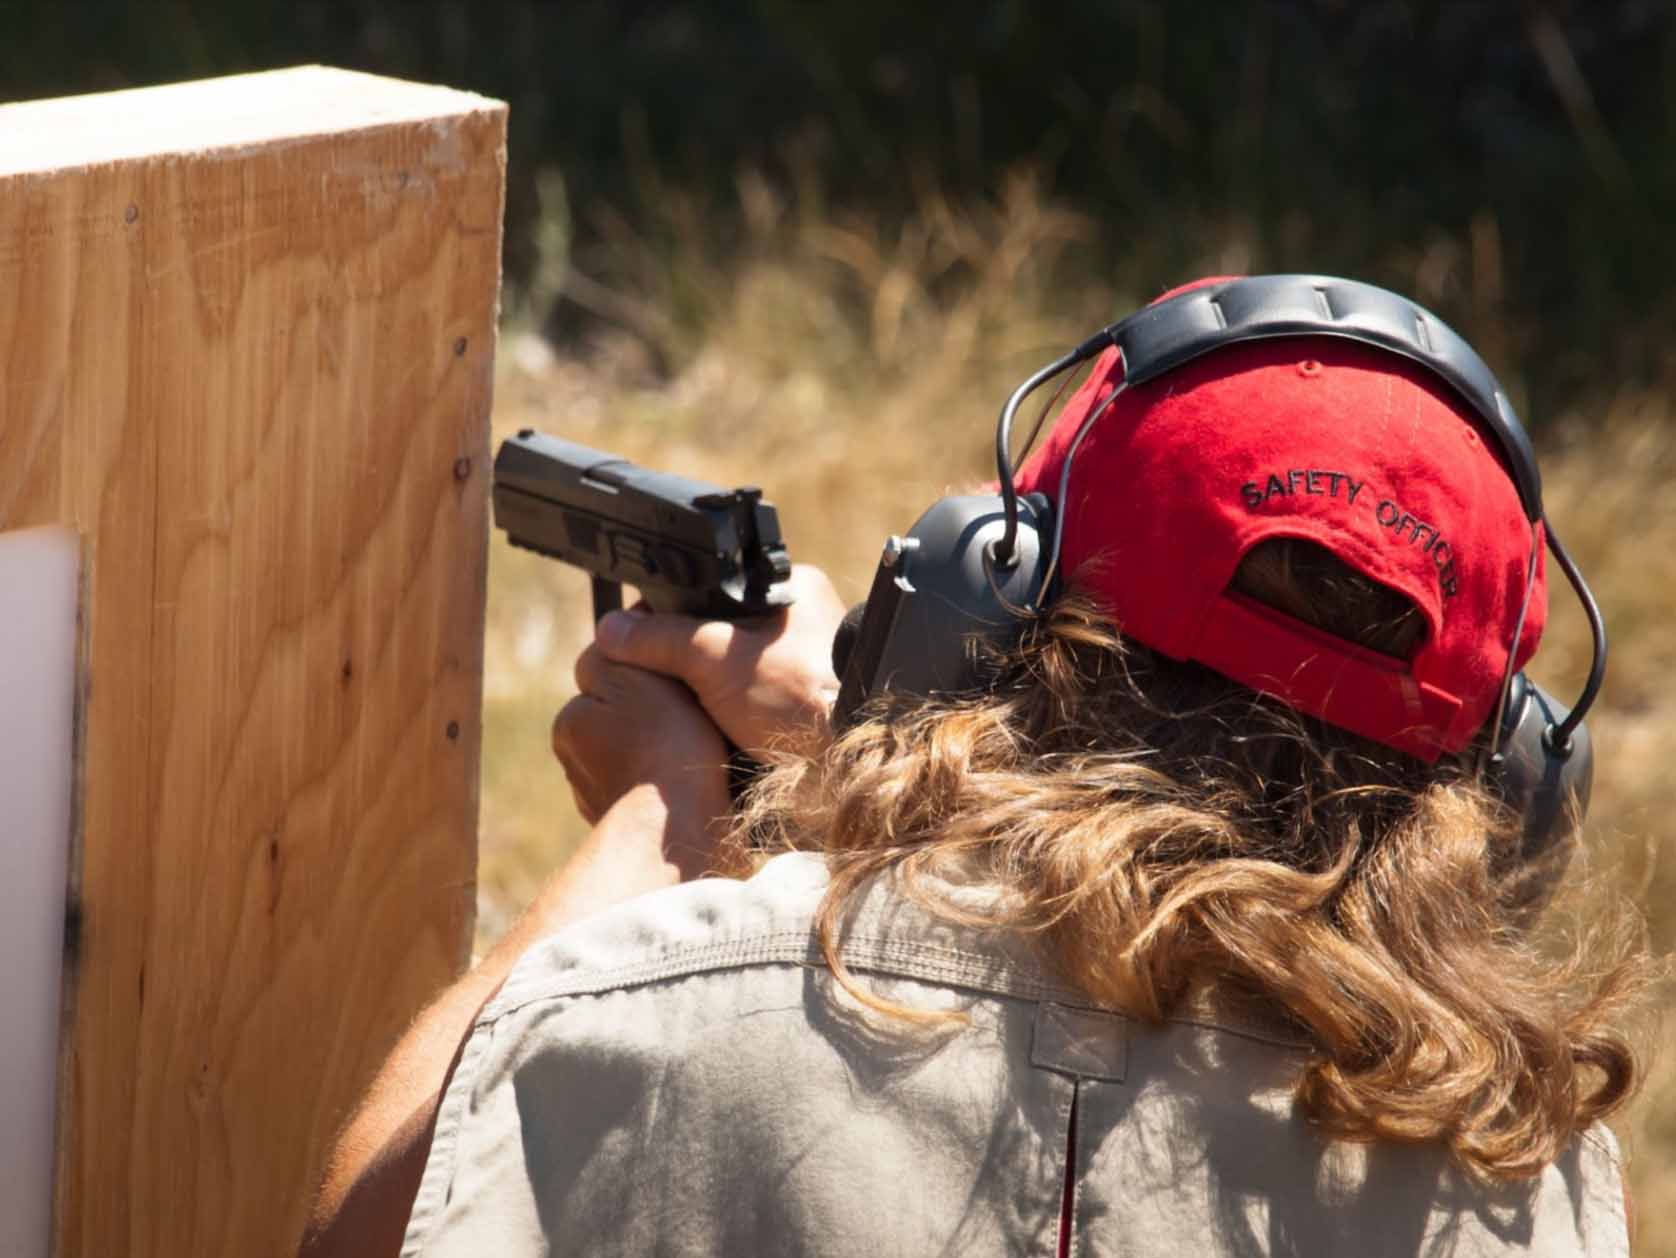 A woman in safety gear aims from behind cover at a shooting competition.